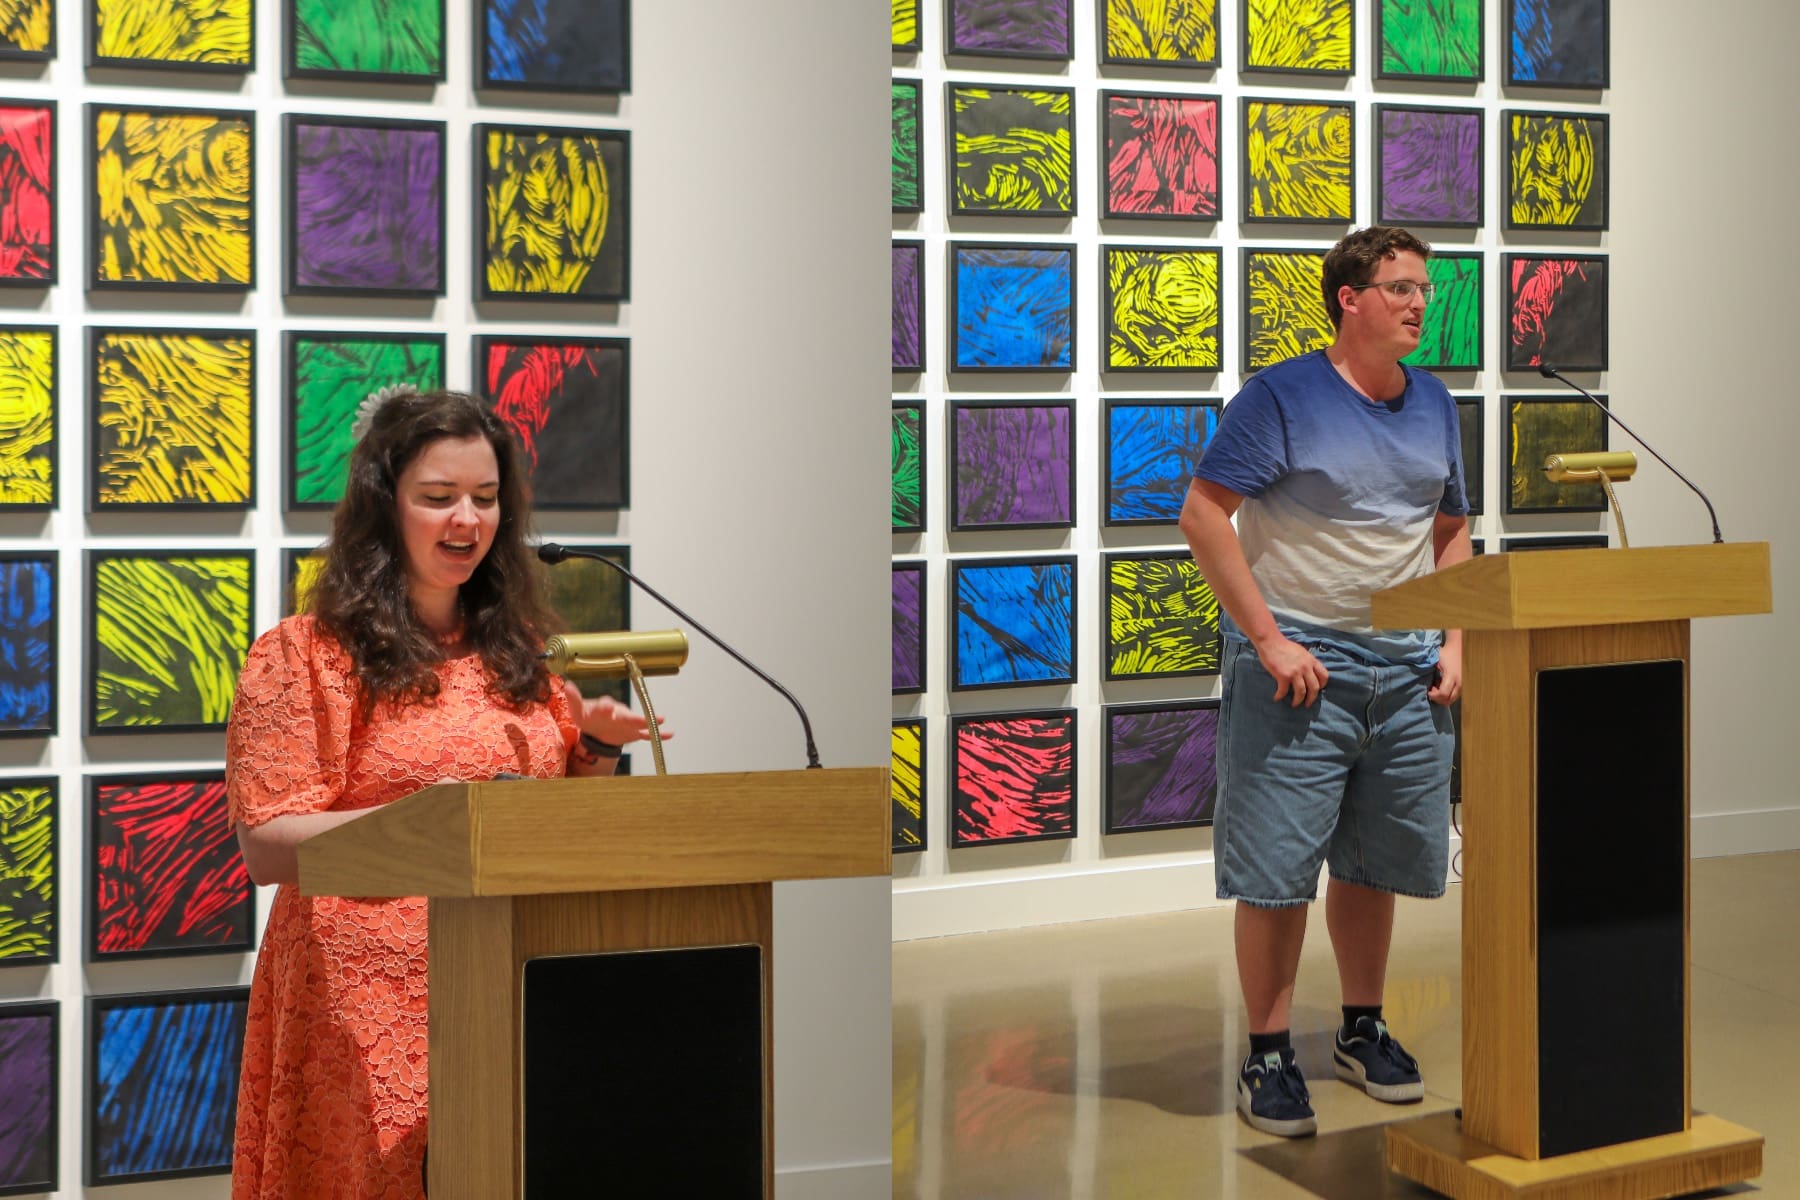 Photos of Lara Law and Alexander Romano reading their work at a podium.